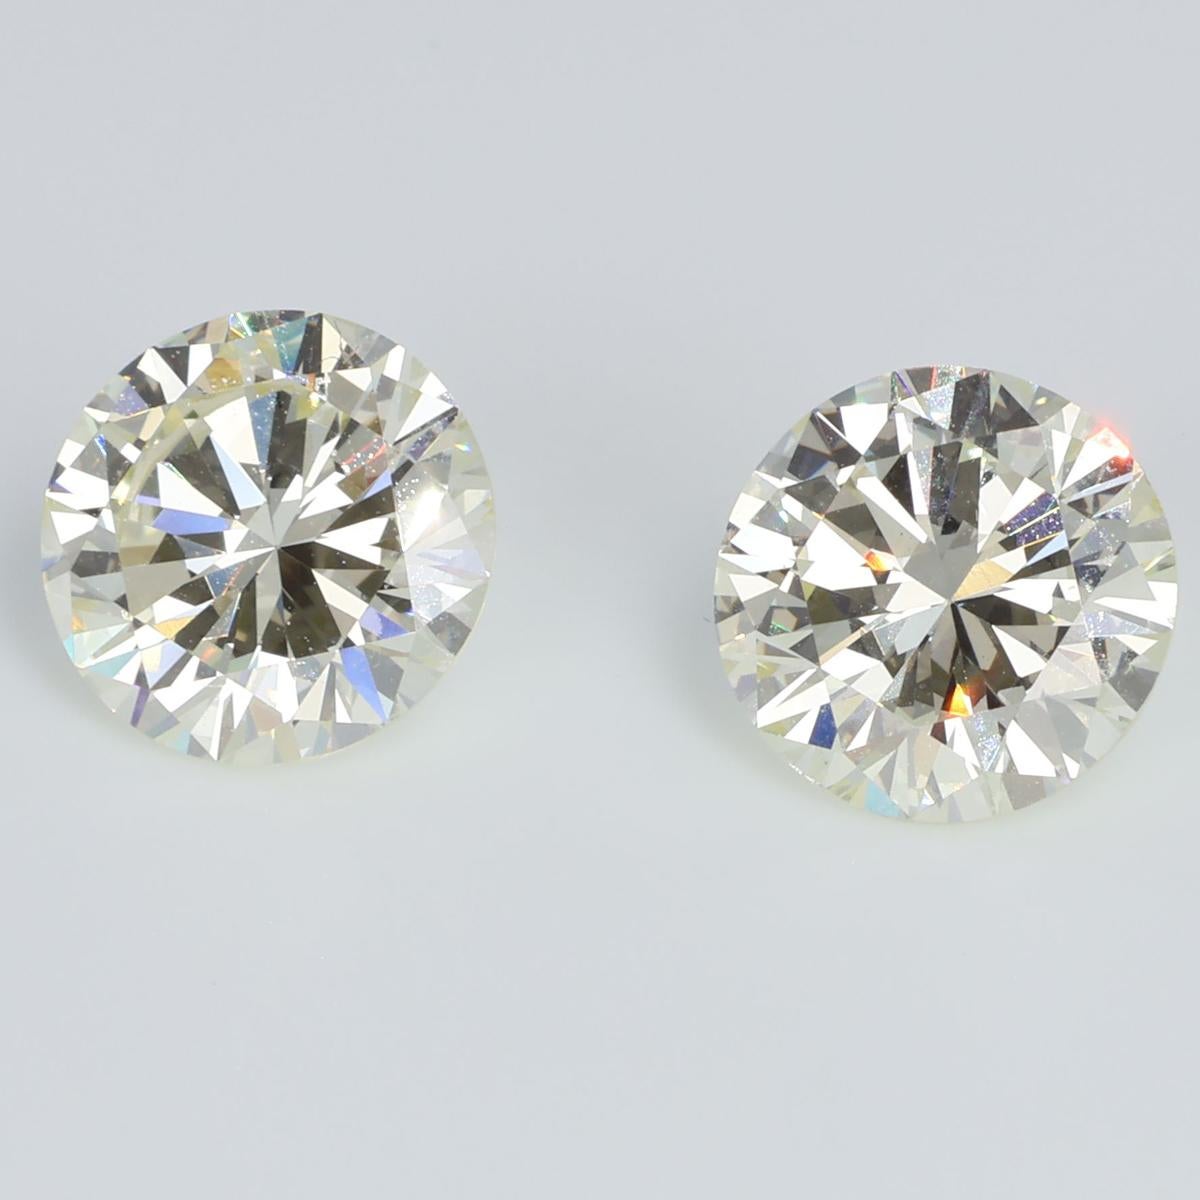 A duet of splendor and subtle hues, these twin diamonds of 2.12 ct each dance with an ethereal light, capturing the essence of refinement. Boasting a VS1 clarity, they exhibit a crystalline purity that defies the depths of imagination. The O-P